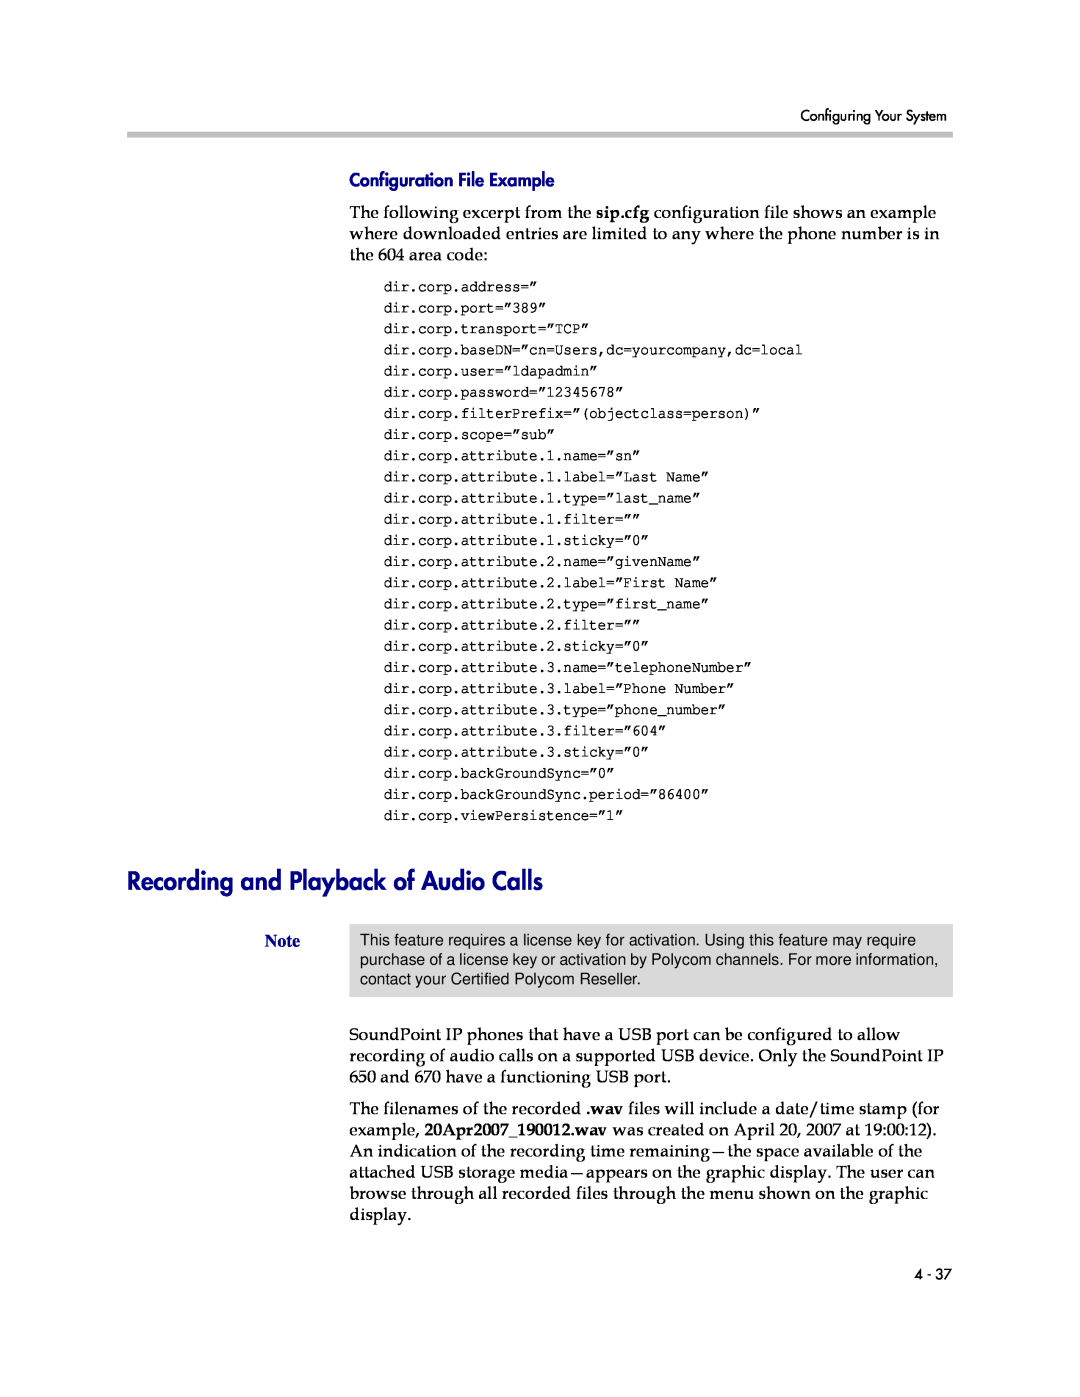 Polycom SIP 3.1 manual Recording and Playback of Audio Calls, Configuration File Example 